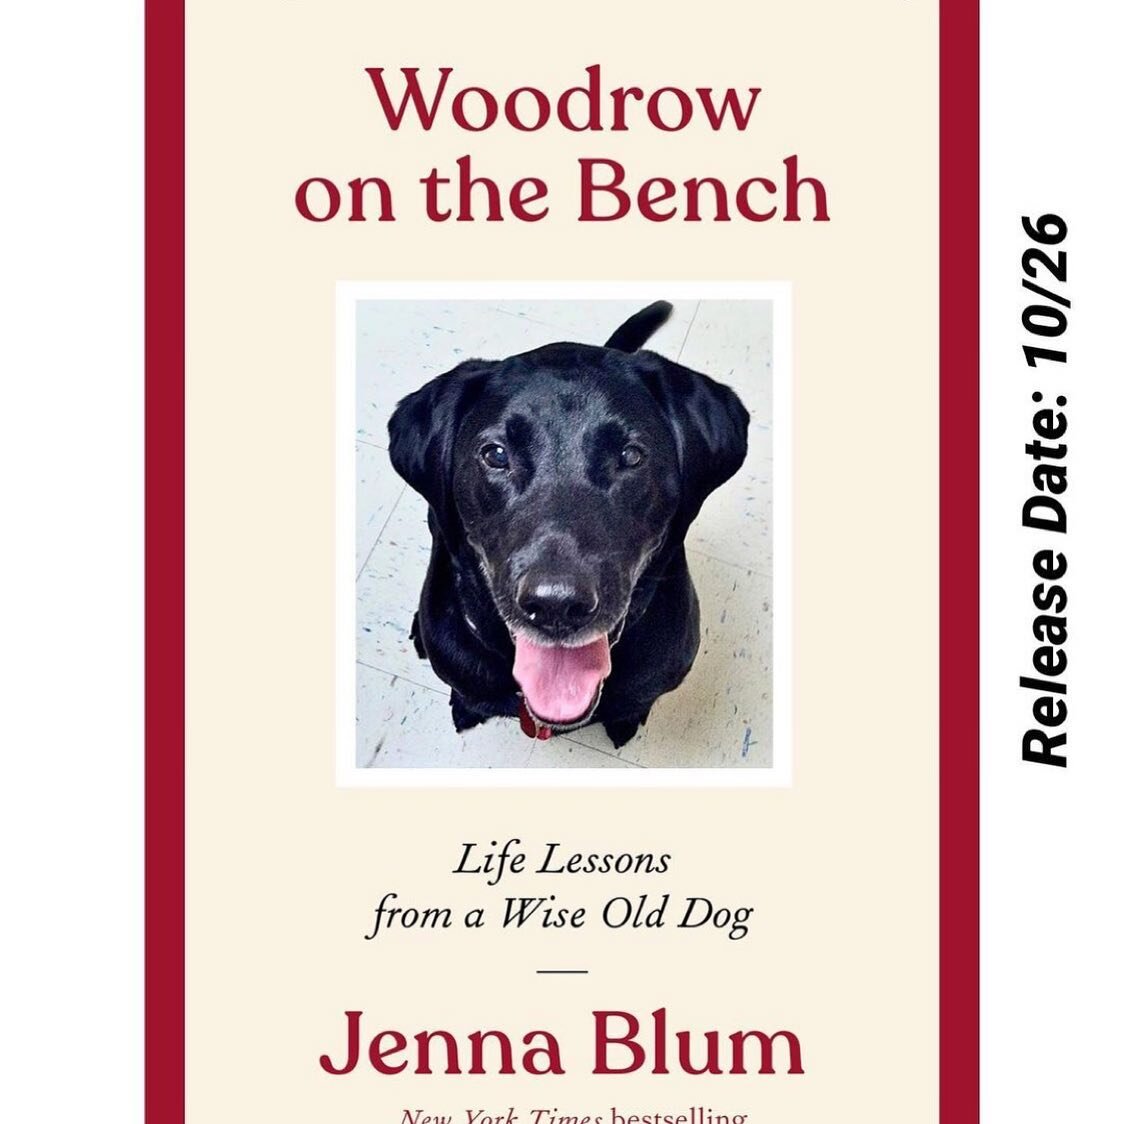 It #GIVEAWAY time! Who would love to read an advance copy of @woodrowonthebench &hellip;? Directions below! 🐾❤️📚⬇️
Repost from @suzyapprovedbookreviews
&bull;
�
Signed Book Giveaway ! 

&rdquo;Woodrow On The Bench &ldquo; by @jenna_blum releases 10